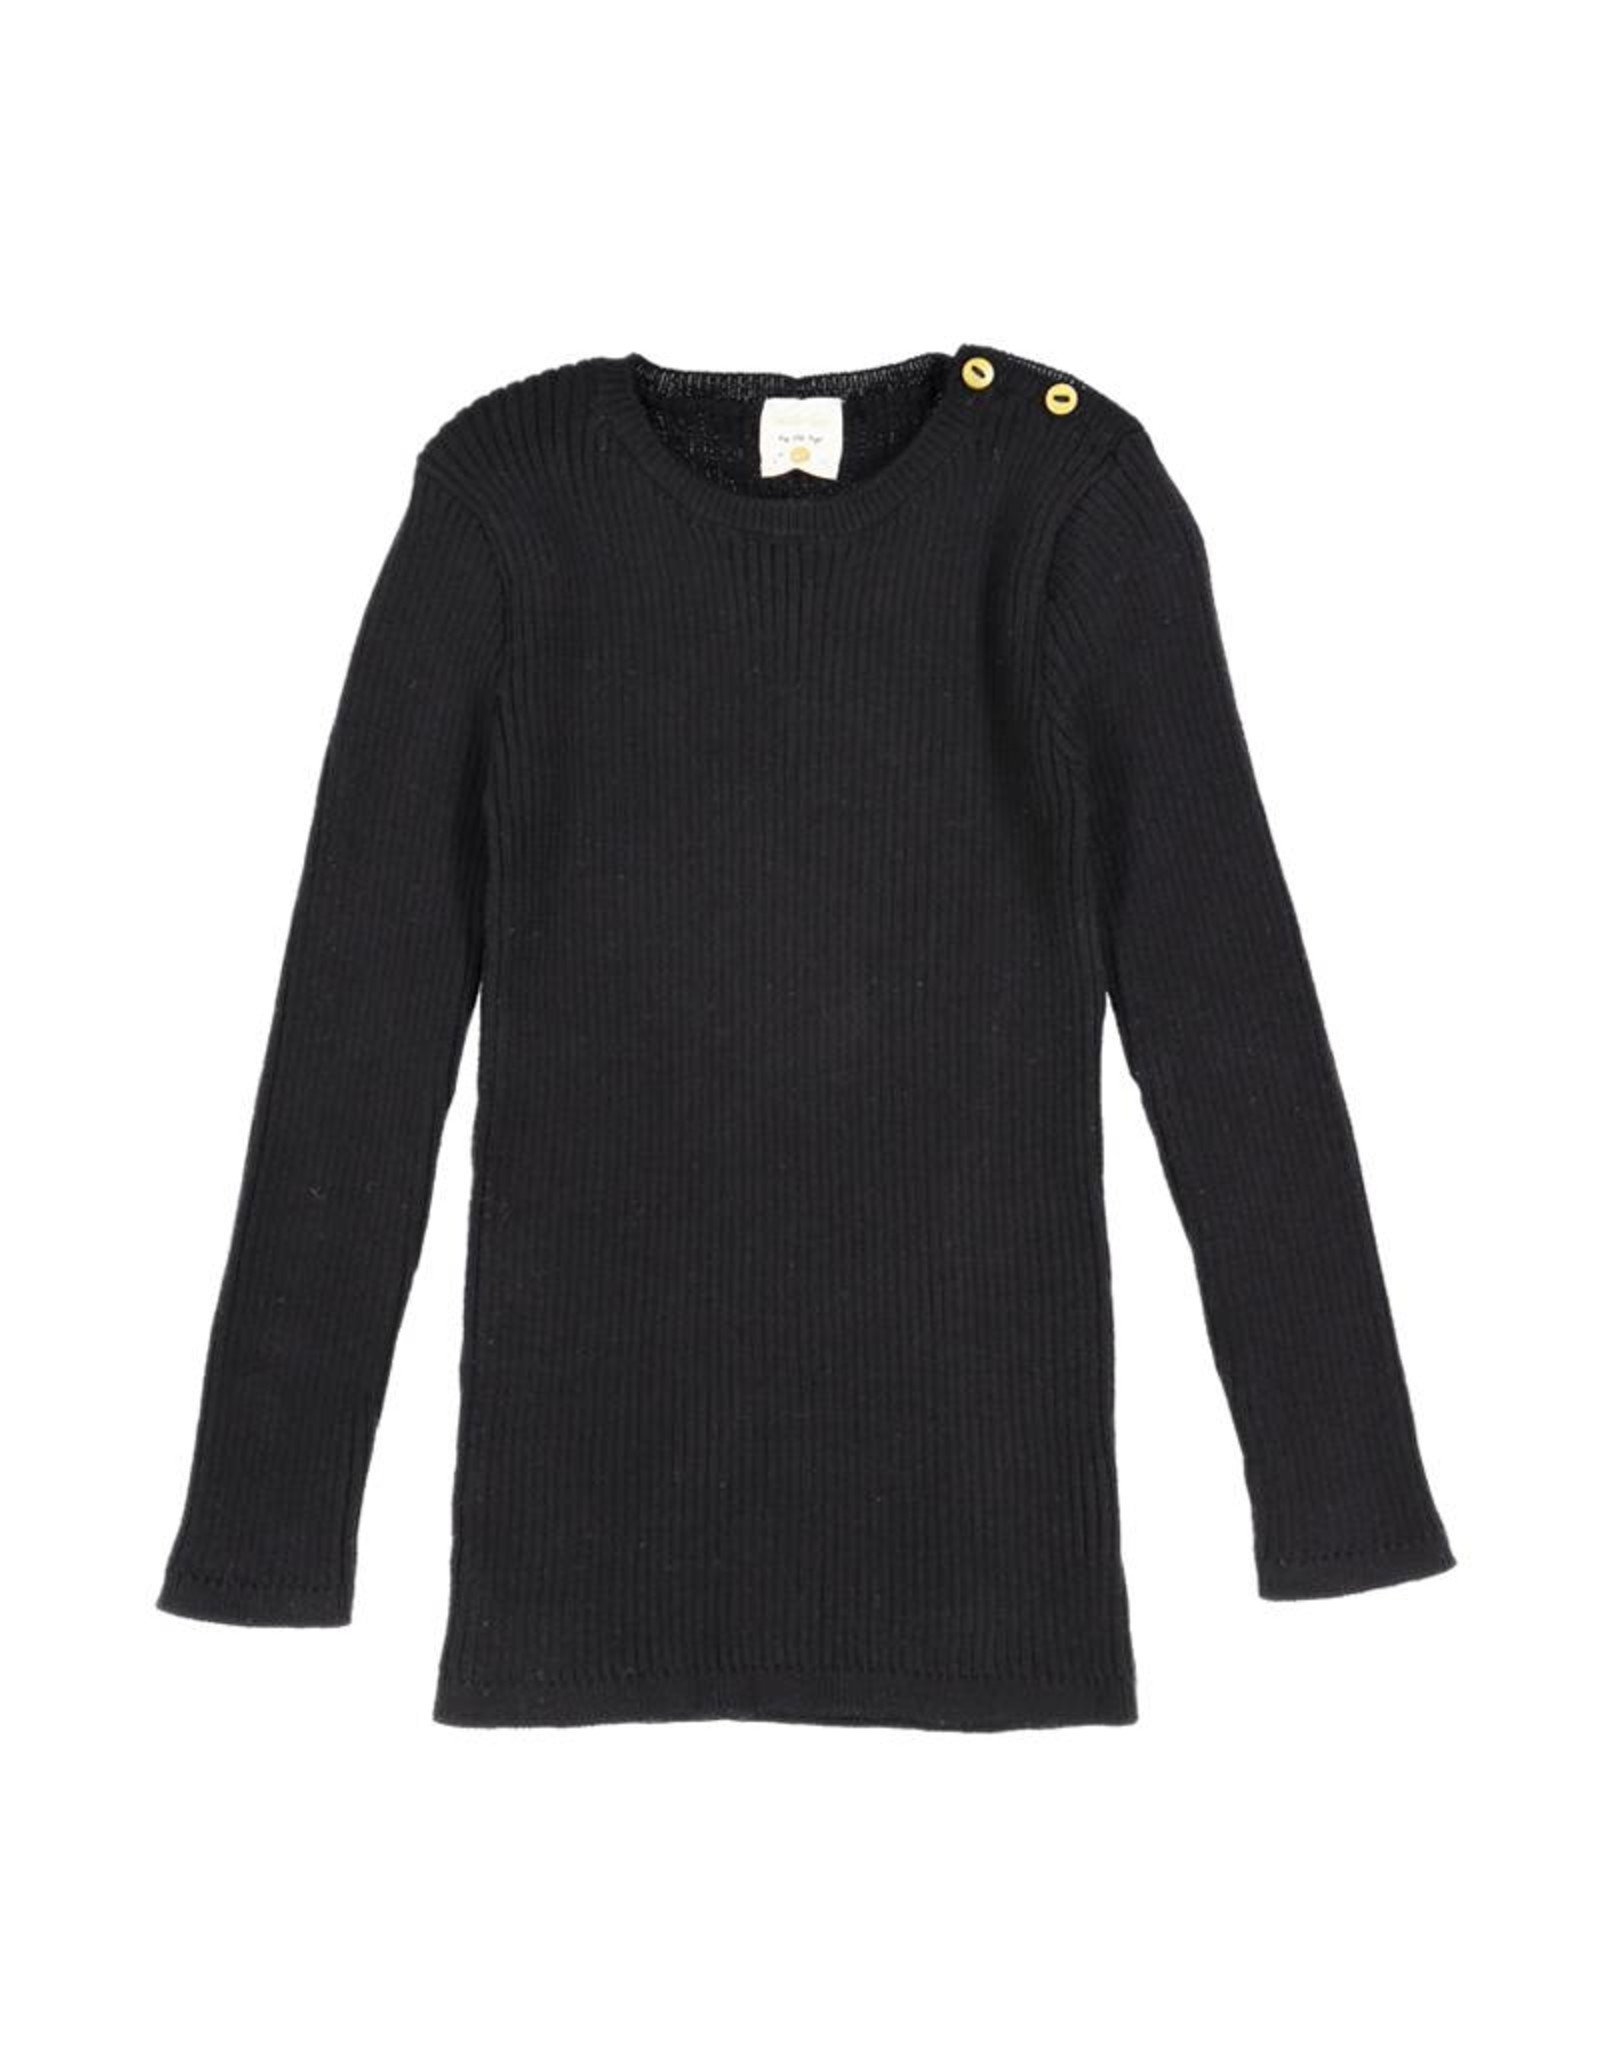 Analogie Analogie SS19 Ribbed Knit Long Sleeve Top